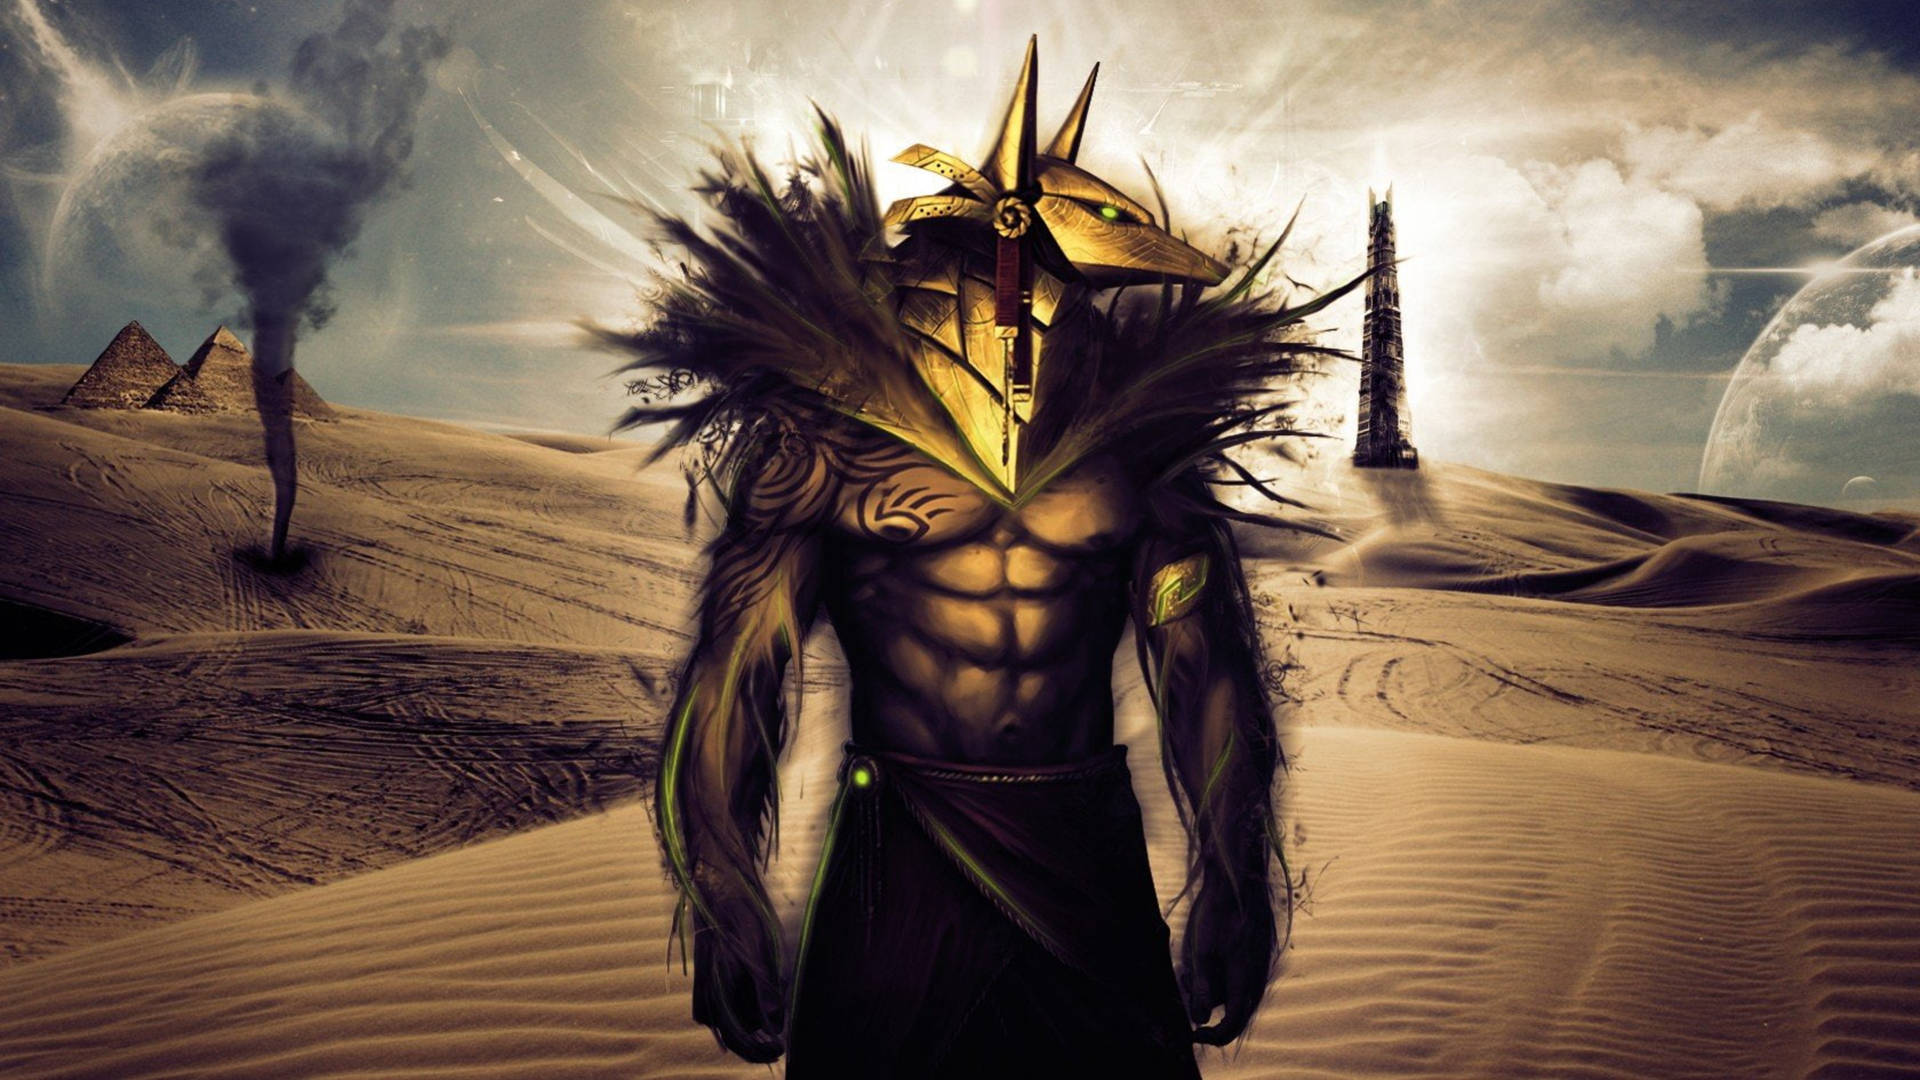 Caption: The Majestic Anubis Overlooking The Egyptian Desert Background